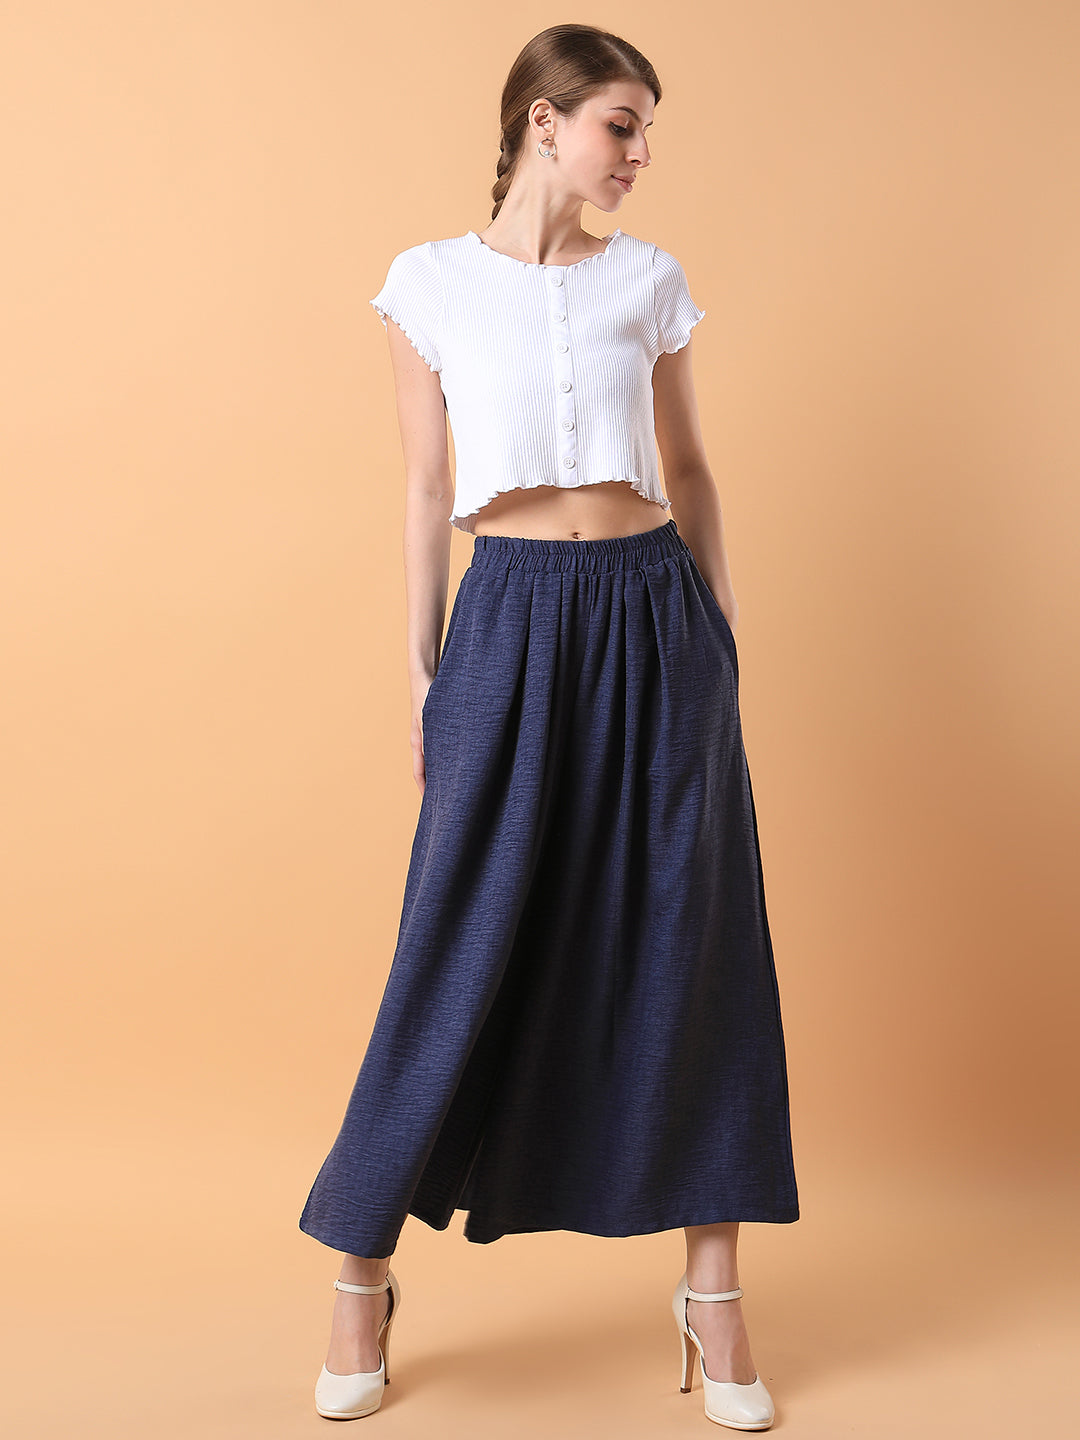 Women Solid Navy Blue Pleated Loose Fit Trouser